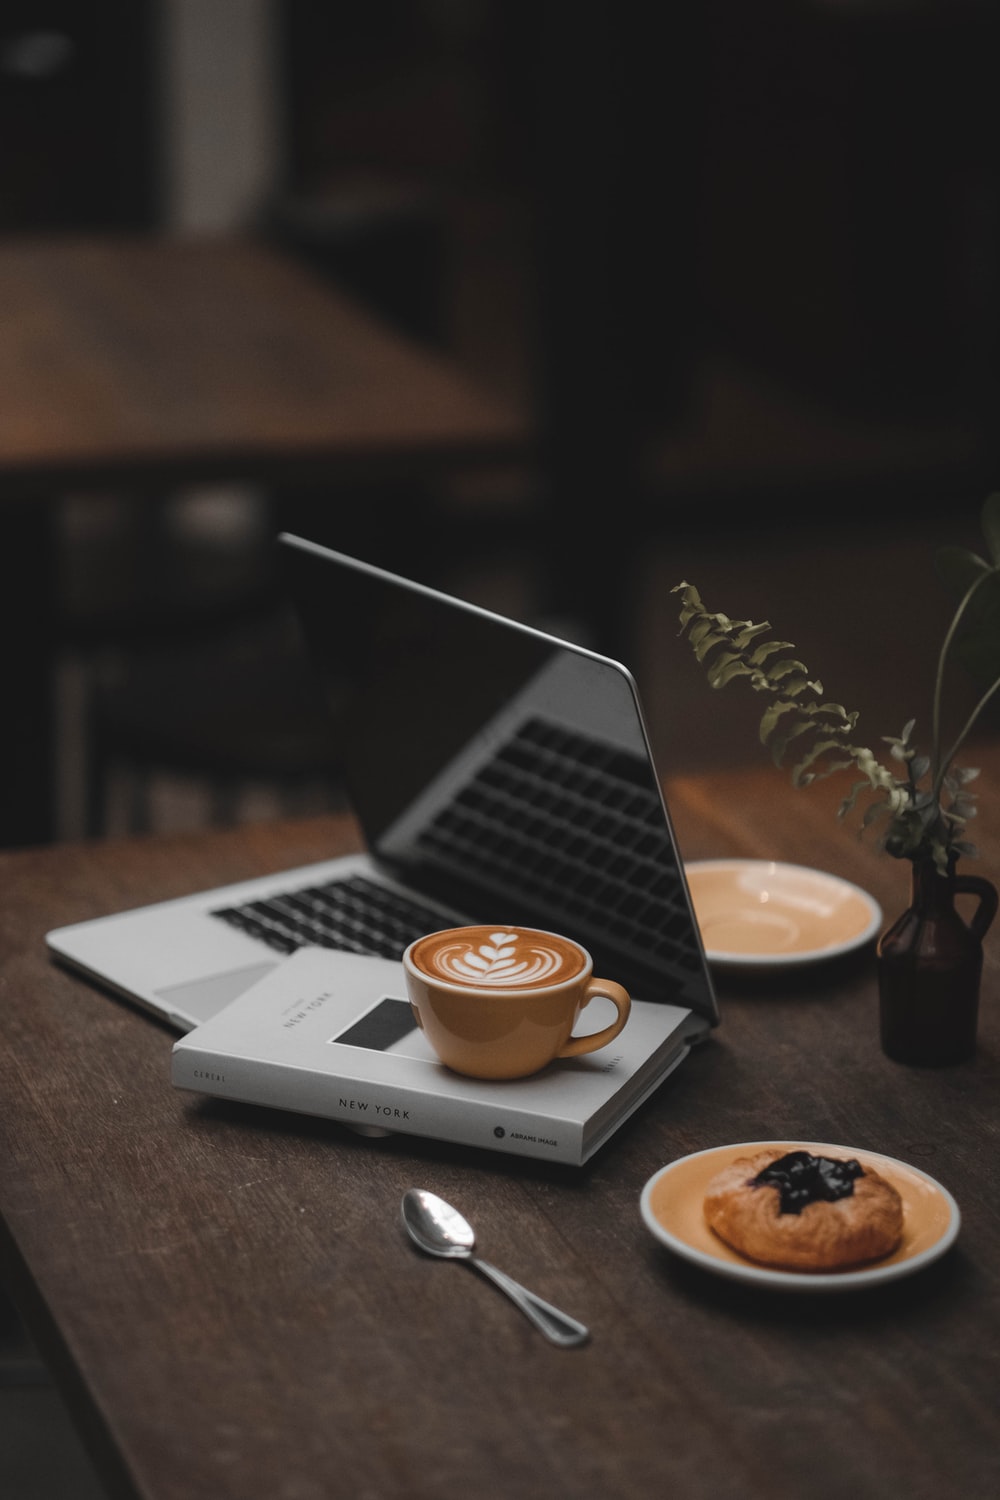 Coffee Laptop Picture. Download Free Image